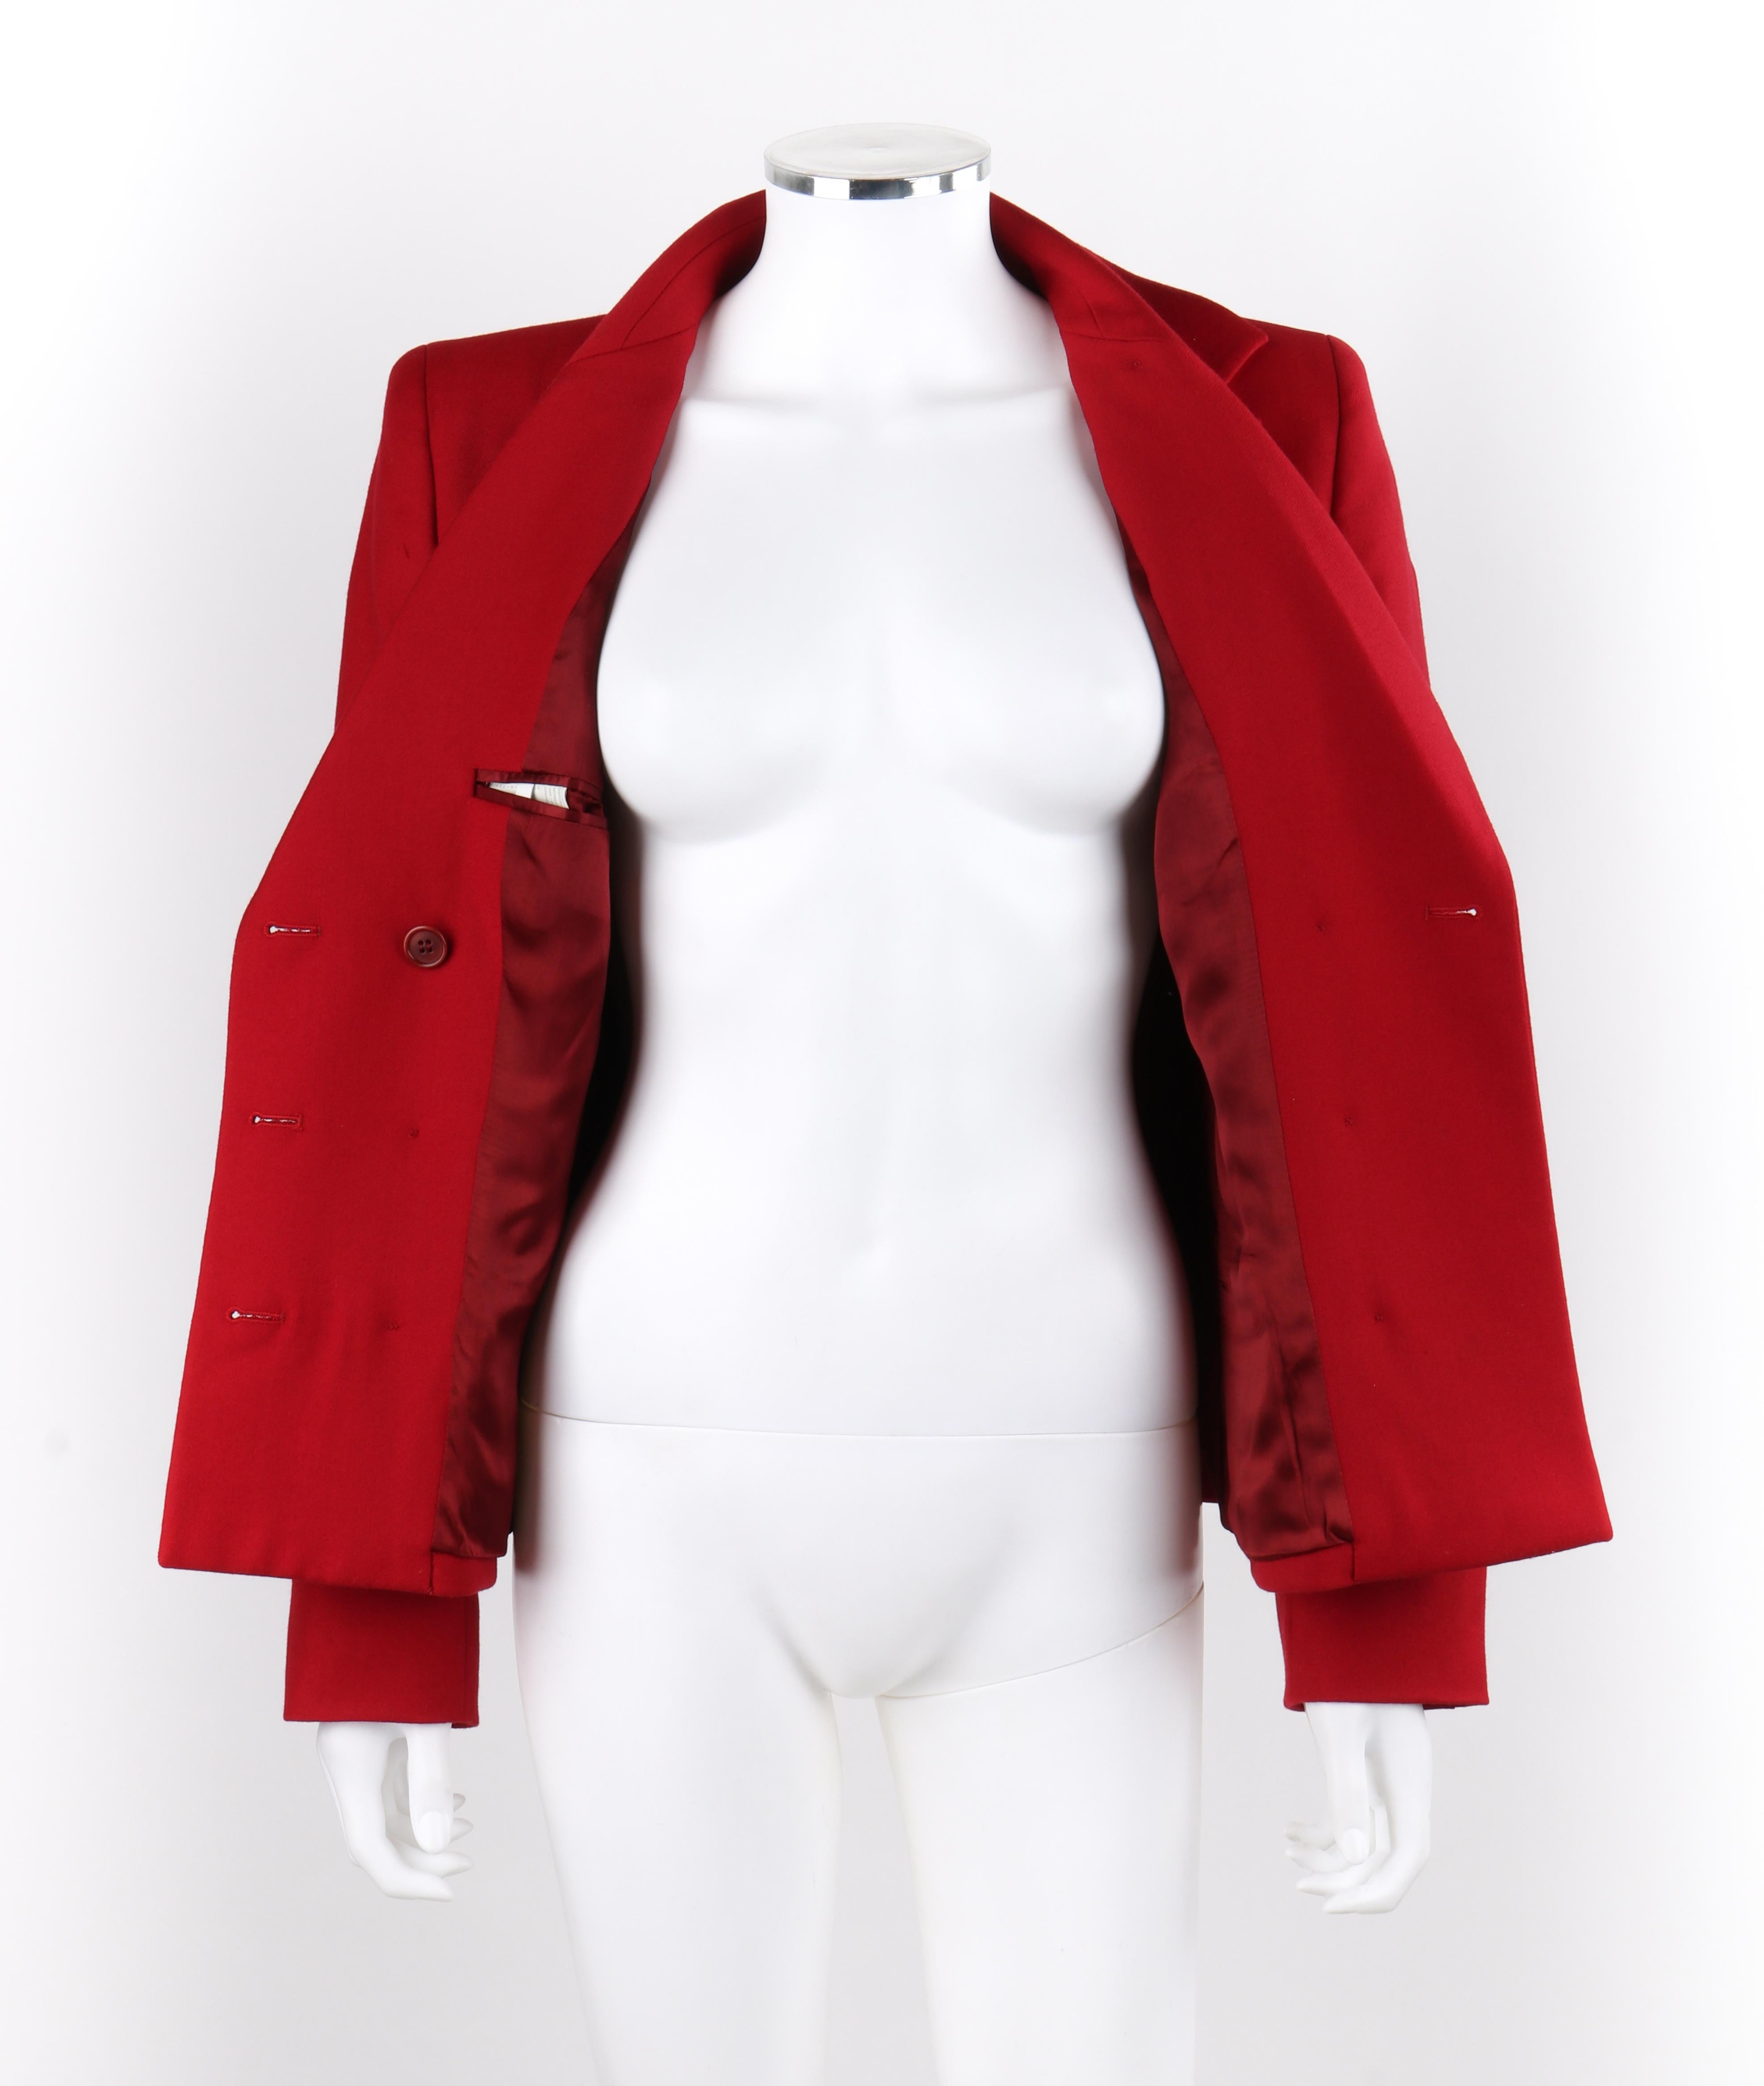 ALEXANDER McQUEEN A/W 1998 “Joan” Red Double Breasted Button Front Blazer Jacket For Sale 2